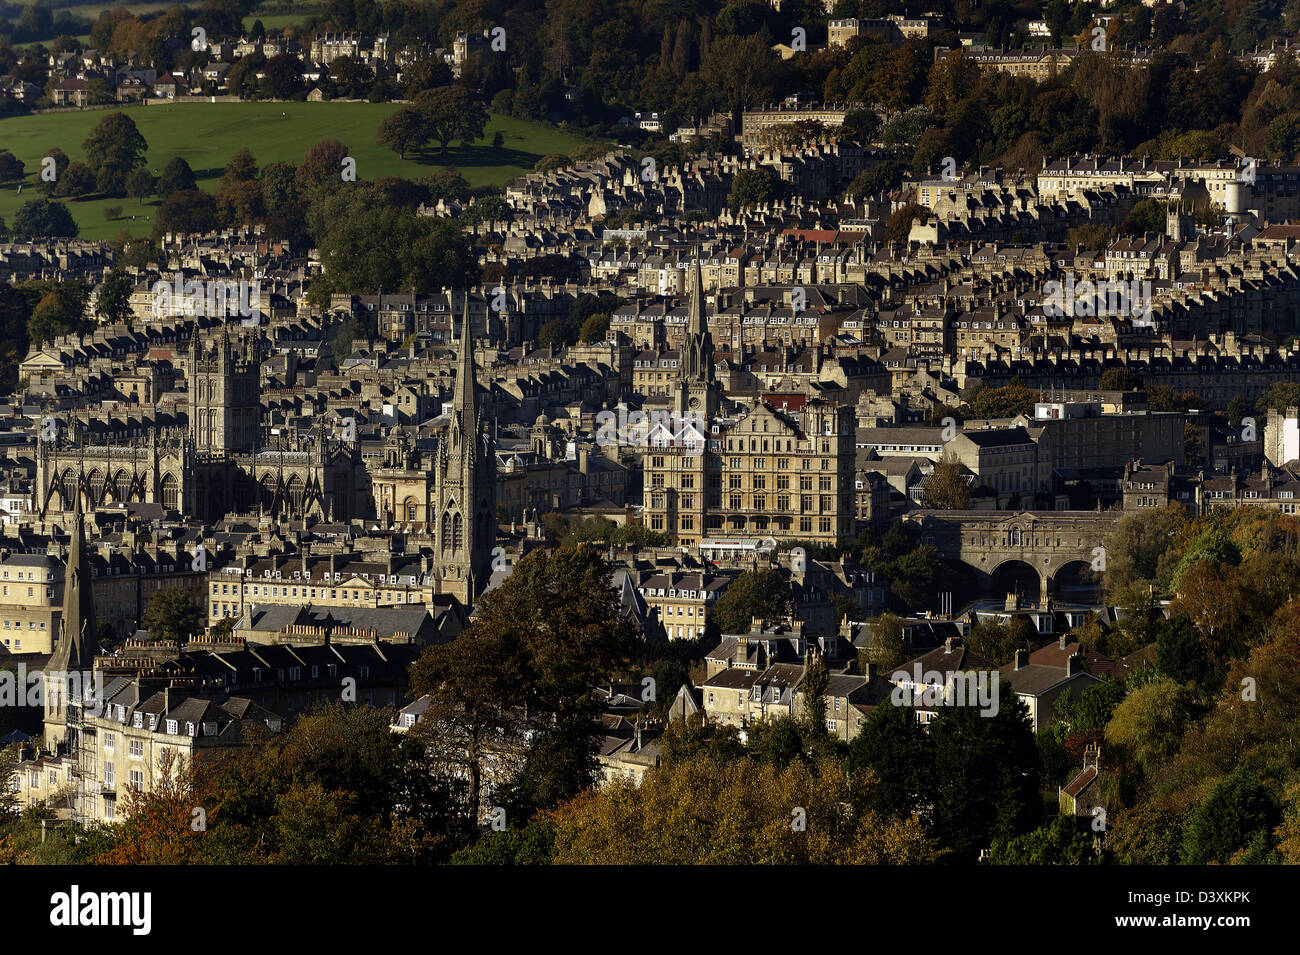 View of the City of Bath from above Widcombe Stock Photo